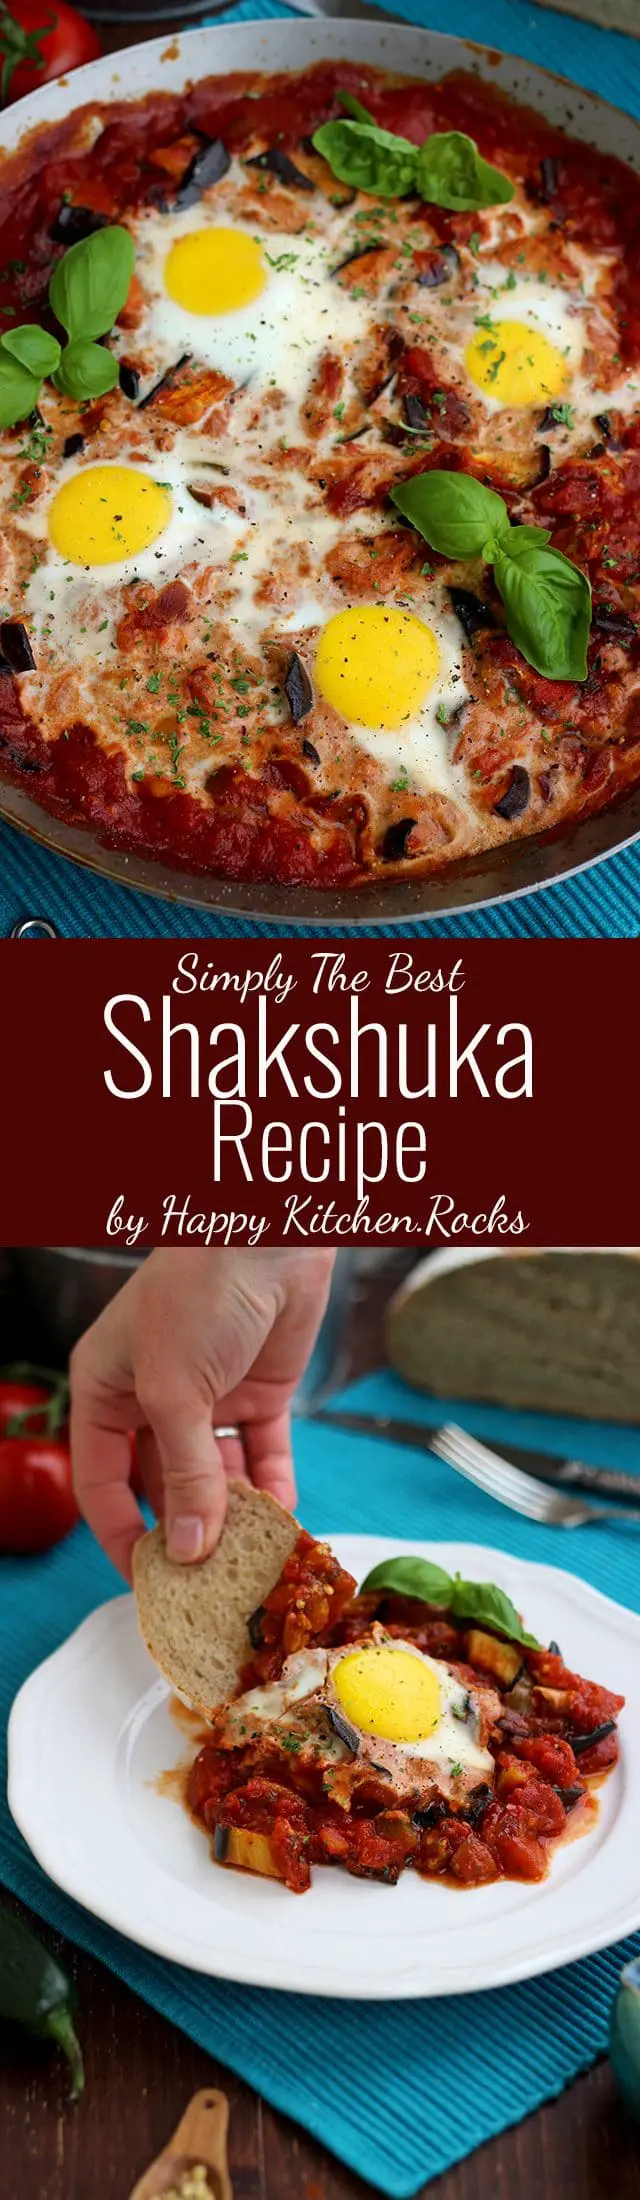 The Best Shakshuka Recipe Super Long Collage with Text Overlay